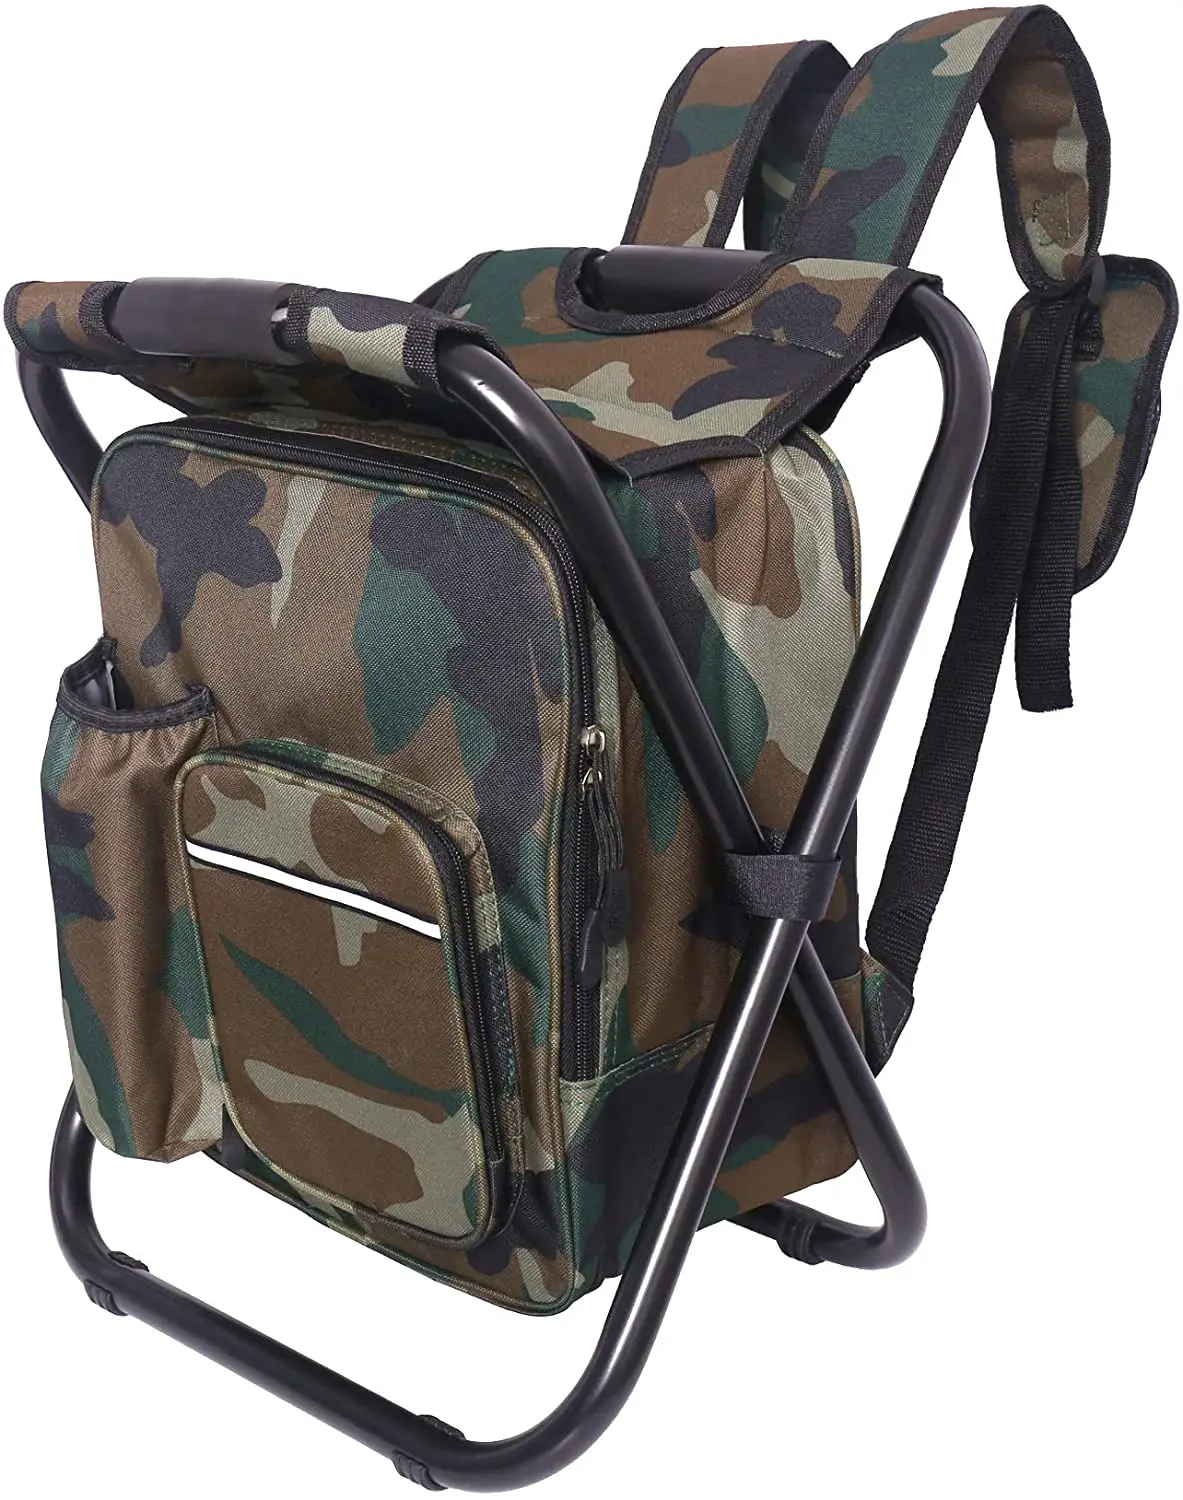 

Folding Camping Chair Stool Backpack with Cooler Insulated Picnic Bag Hiking Seat Table Bag Camping Gear for Fishing BBQ